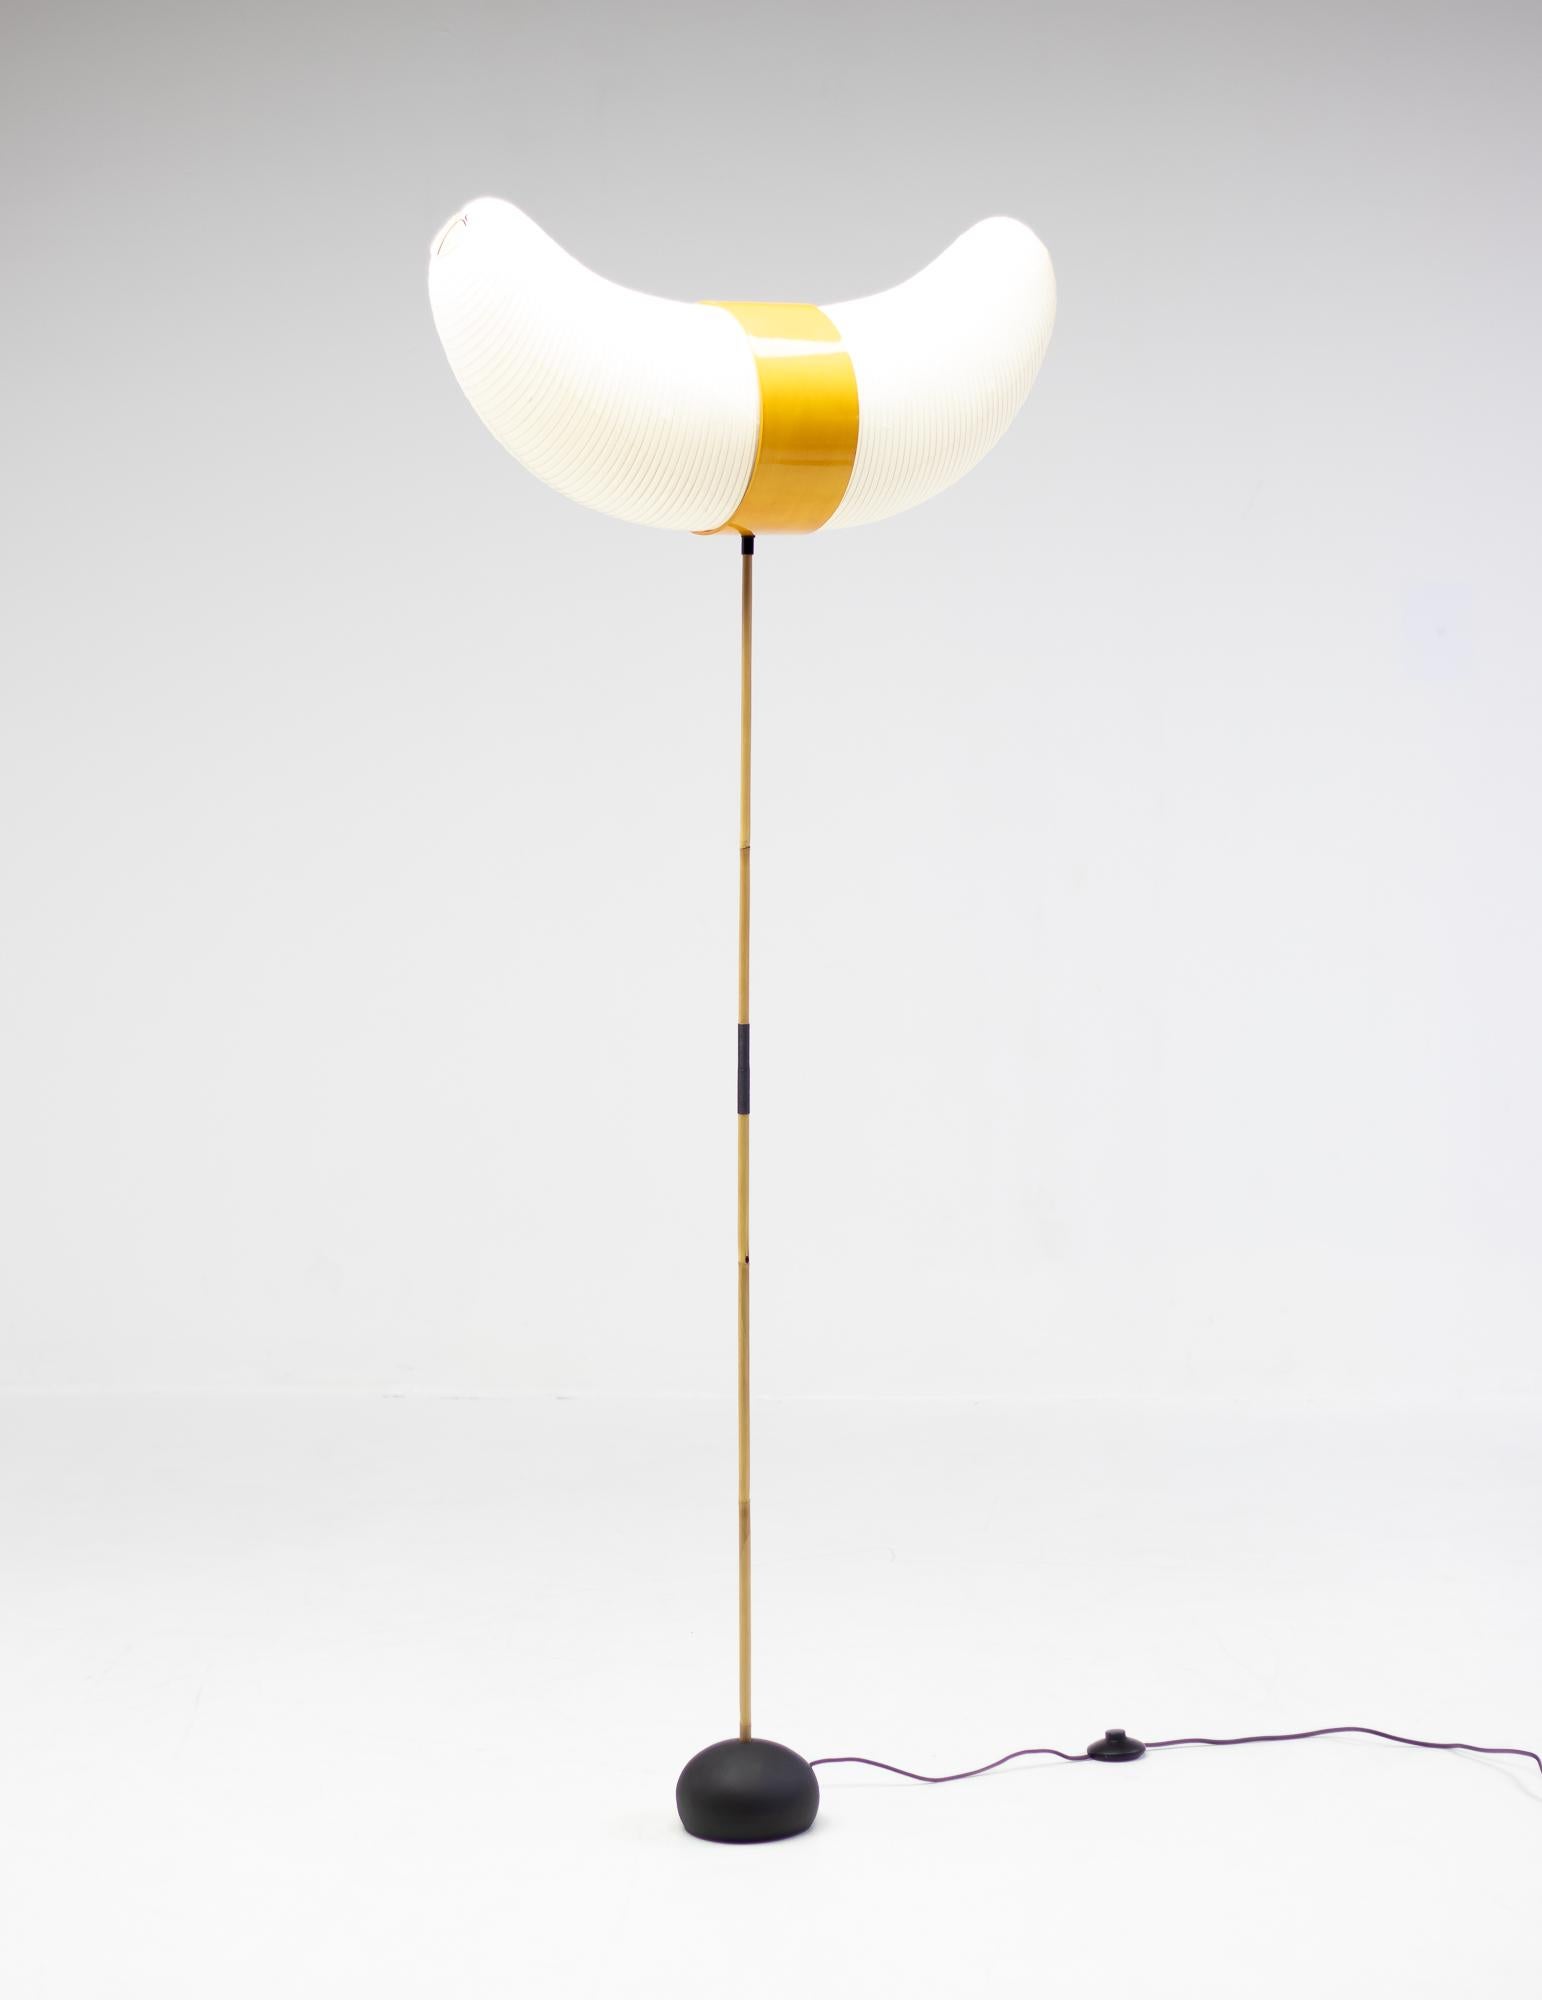 Poetic Isamu Noguchi Akari floor lamp, model BB3-33S. 
Cast iron base with bamboo stem and a handmade washi paper shade. 

Akari Light Sculptures by Isamu Noguchi are considered icons of 1950s modern design. 
Designed by Noguchi beginning in